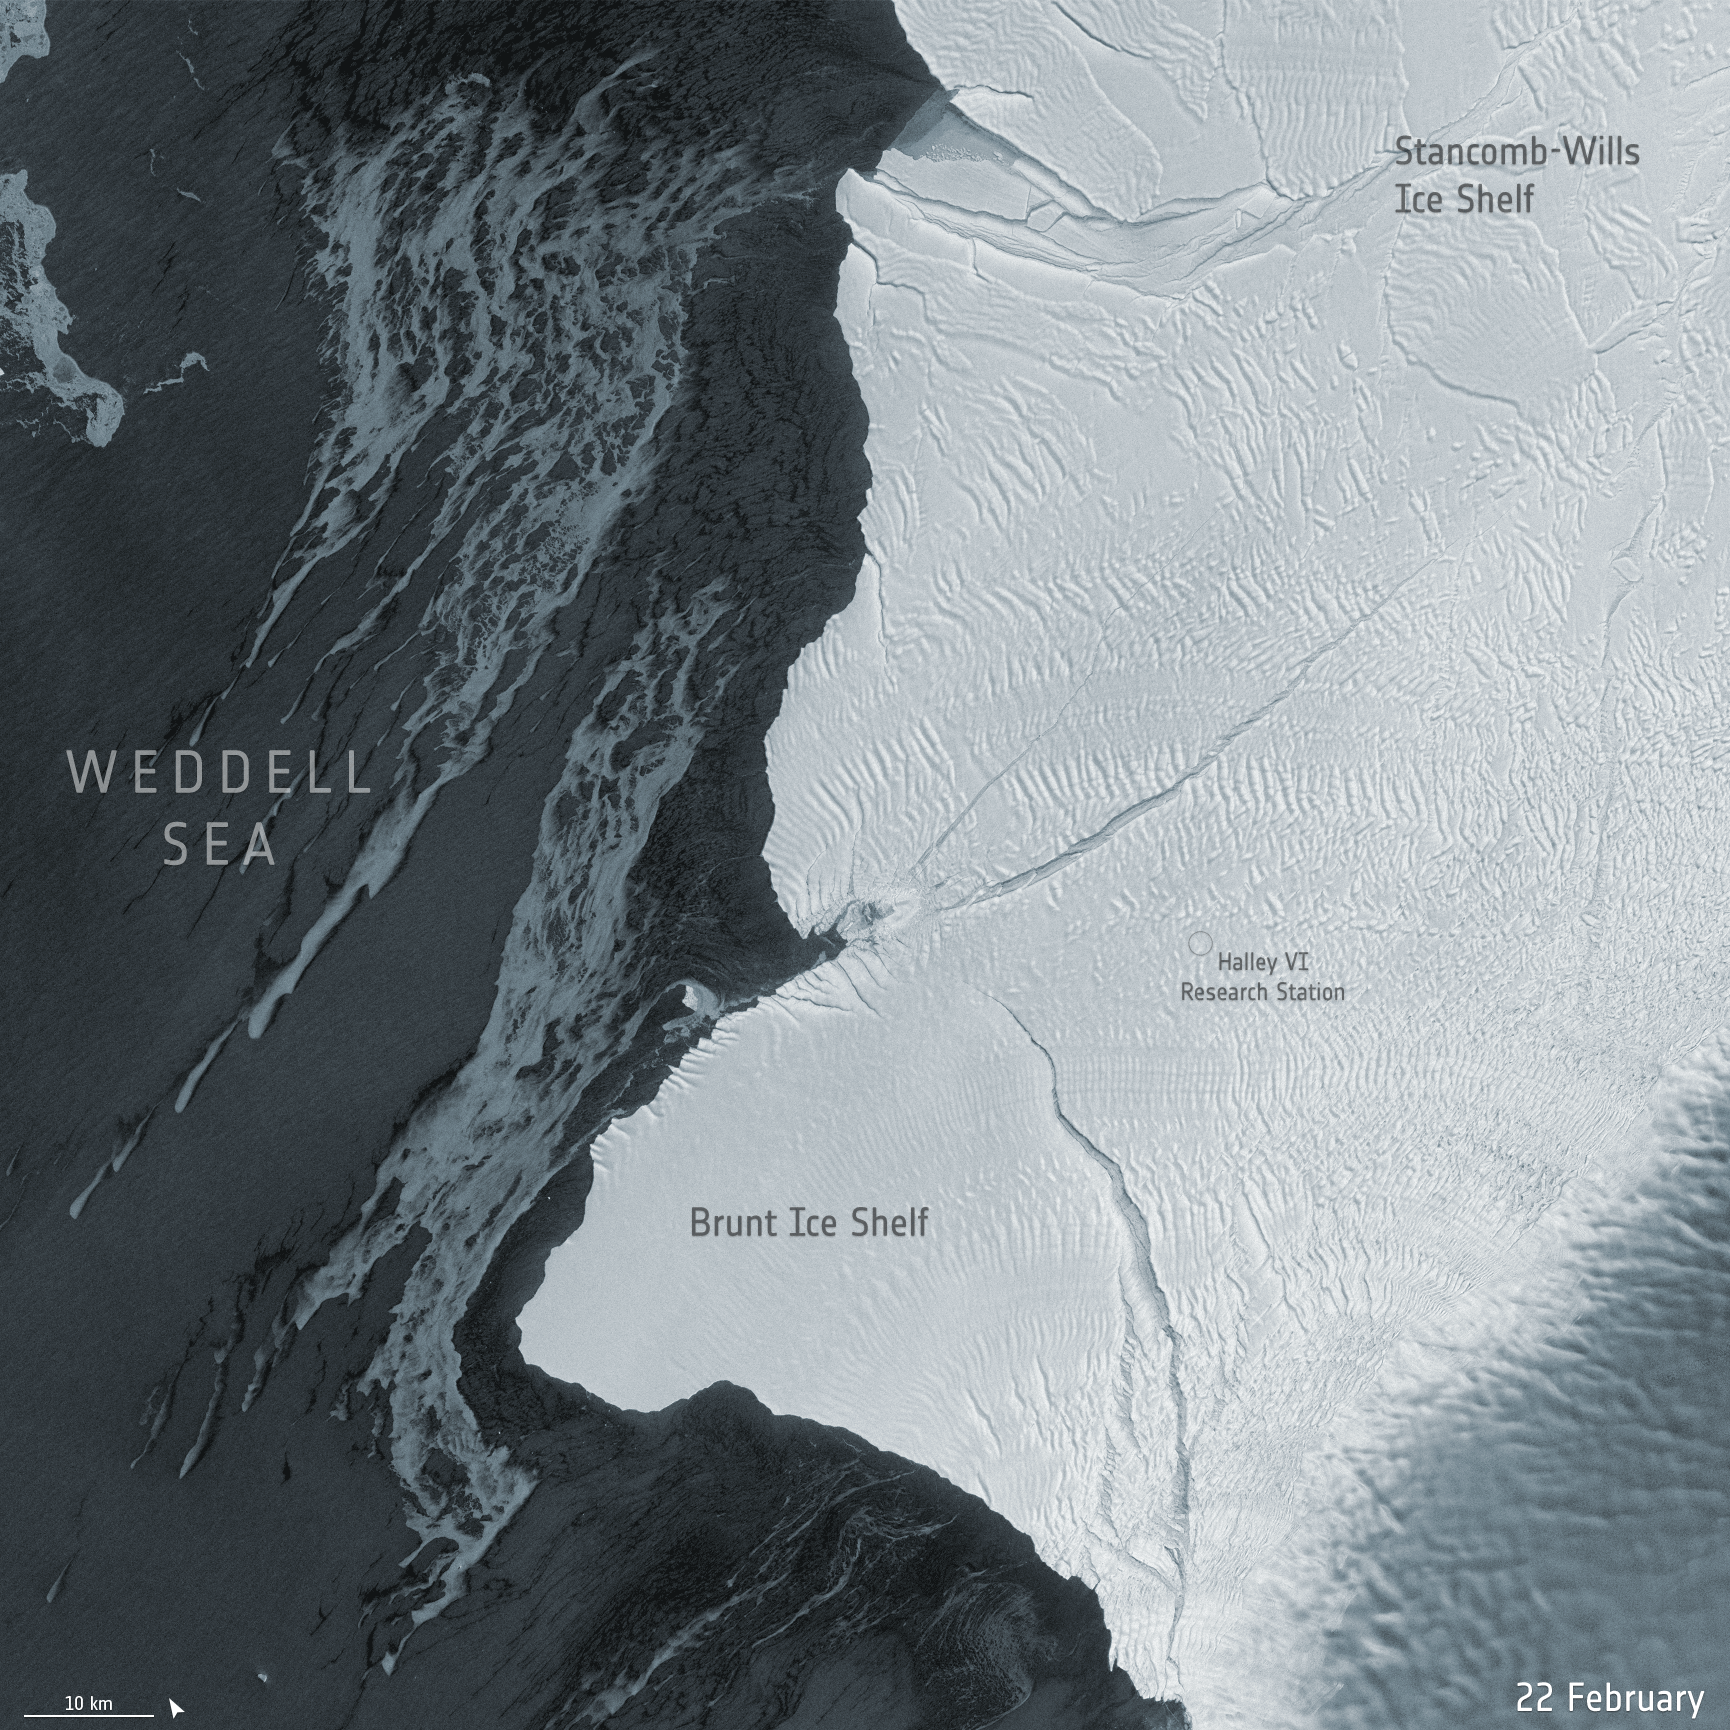 Here we see satellite photos from March 2021 showing the calving of A-74.  Note the rift at the bottom of the Brunt Ice Shelf, which has now broken into a new iceberg.  The new position of Halley Base is also visible.